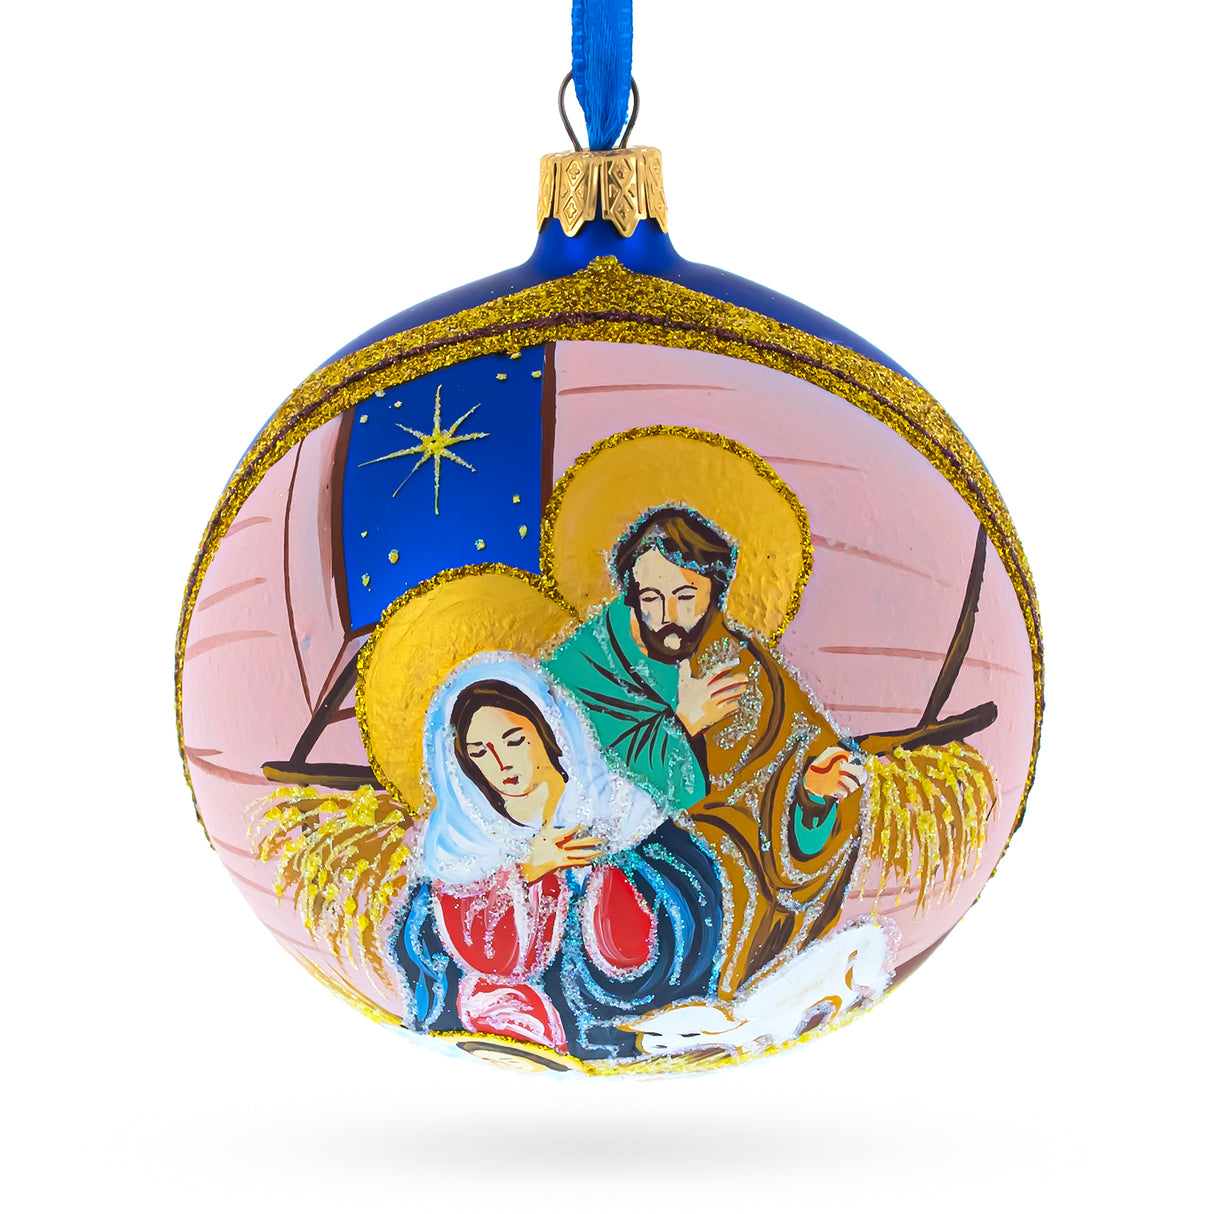 Glass Serene Baby Jesus Sleeping Nativity Scene - Blown Glass Ball Christmas Ornament 4 Inches in Blue color Round